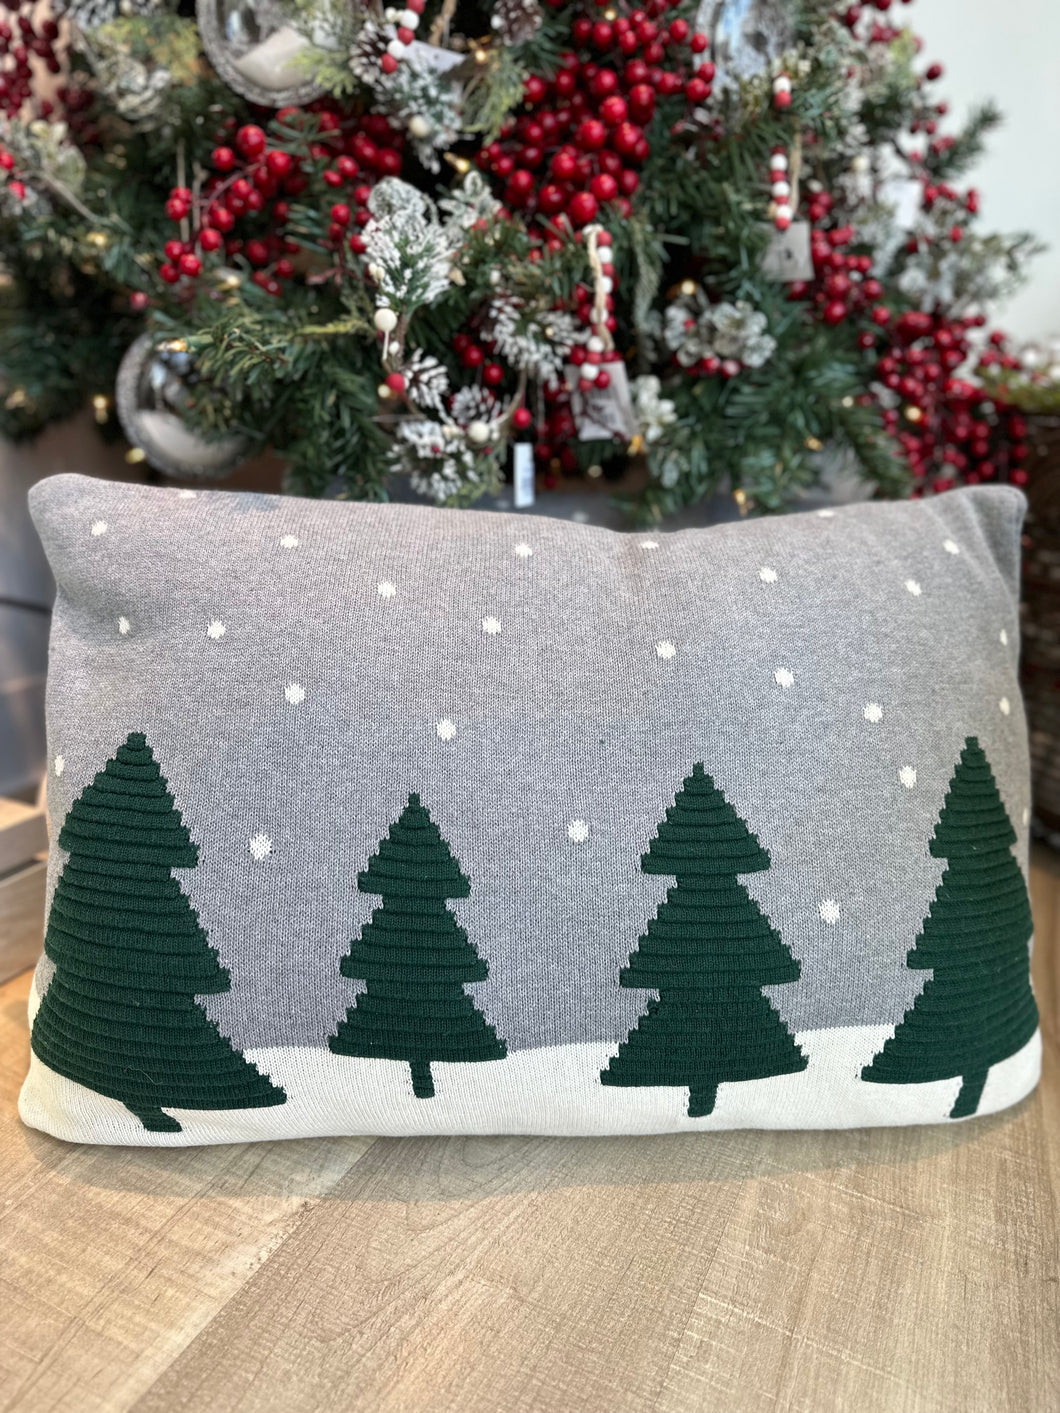 Grey Pillow with 4 dark green pines with a snowy scene backdrop.